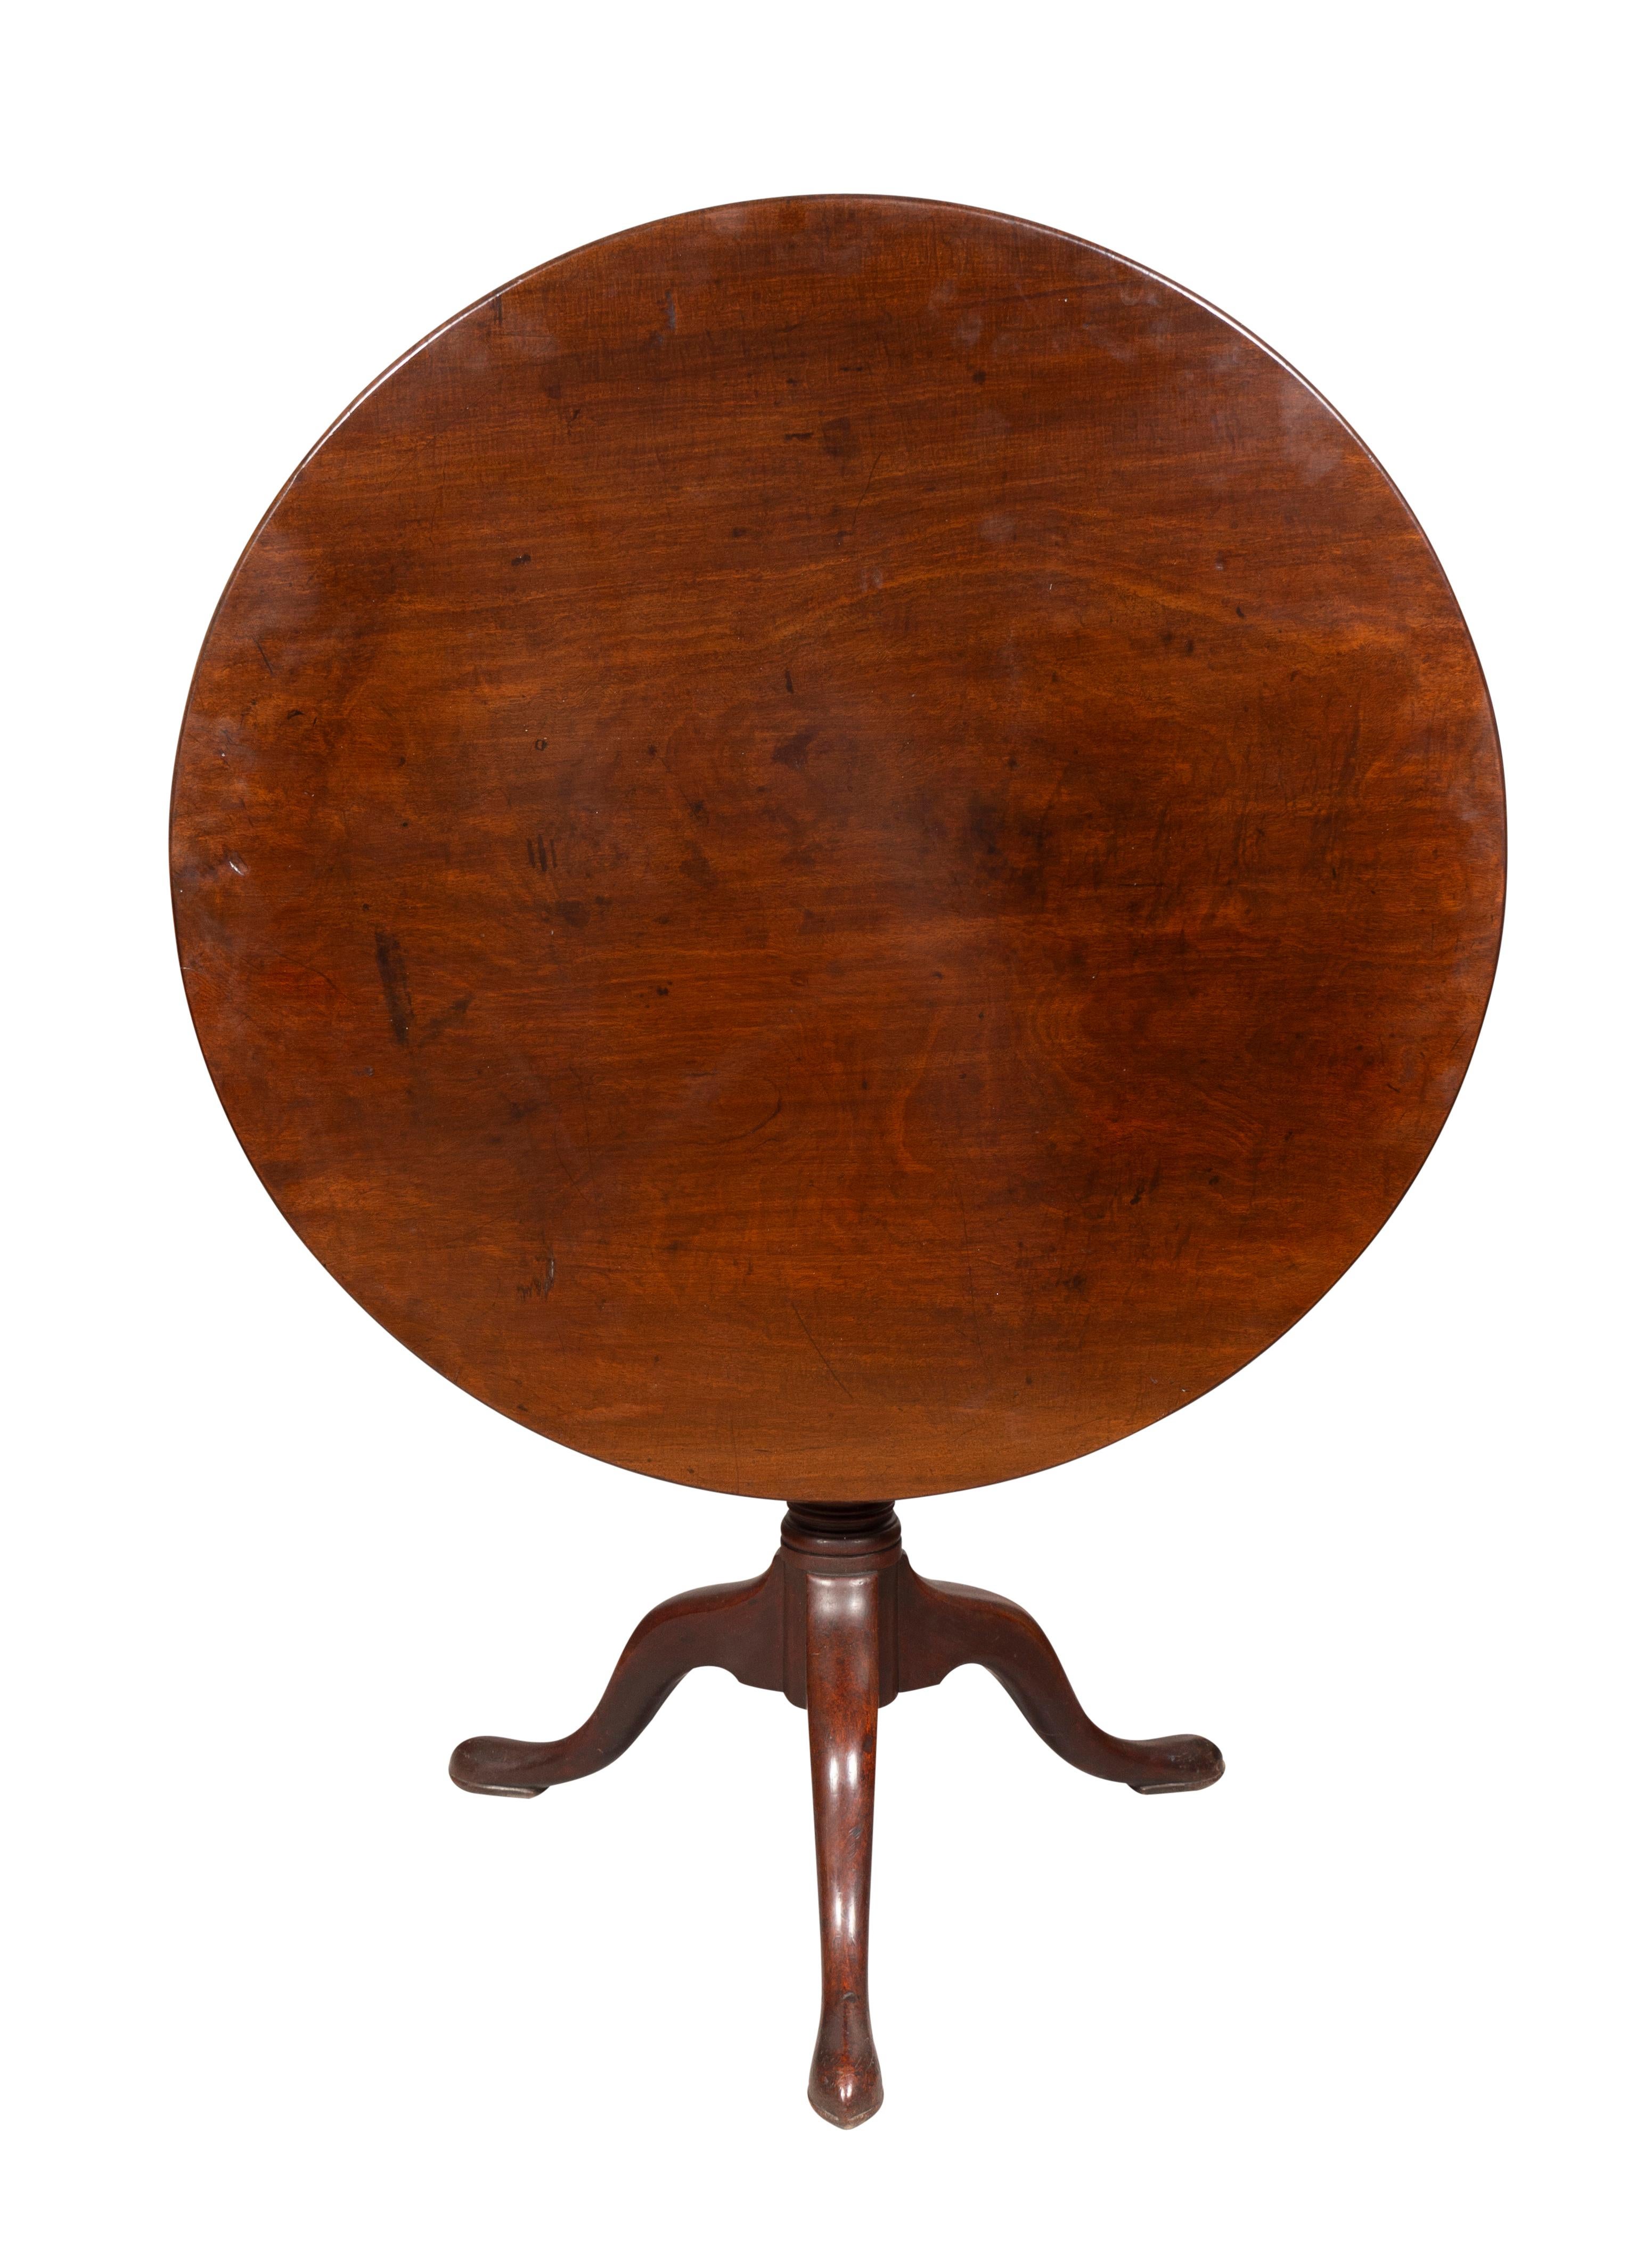 Late 18th Century George III Mahogany Tilt Top Table For Sale